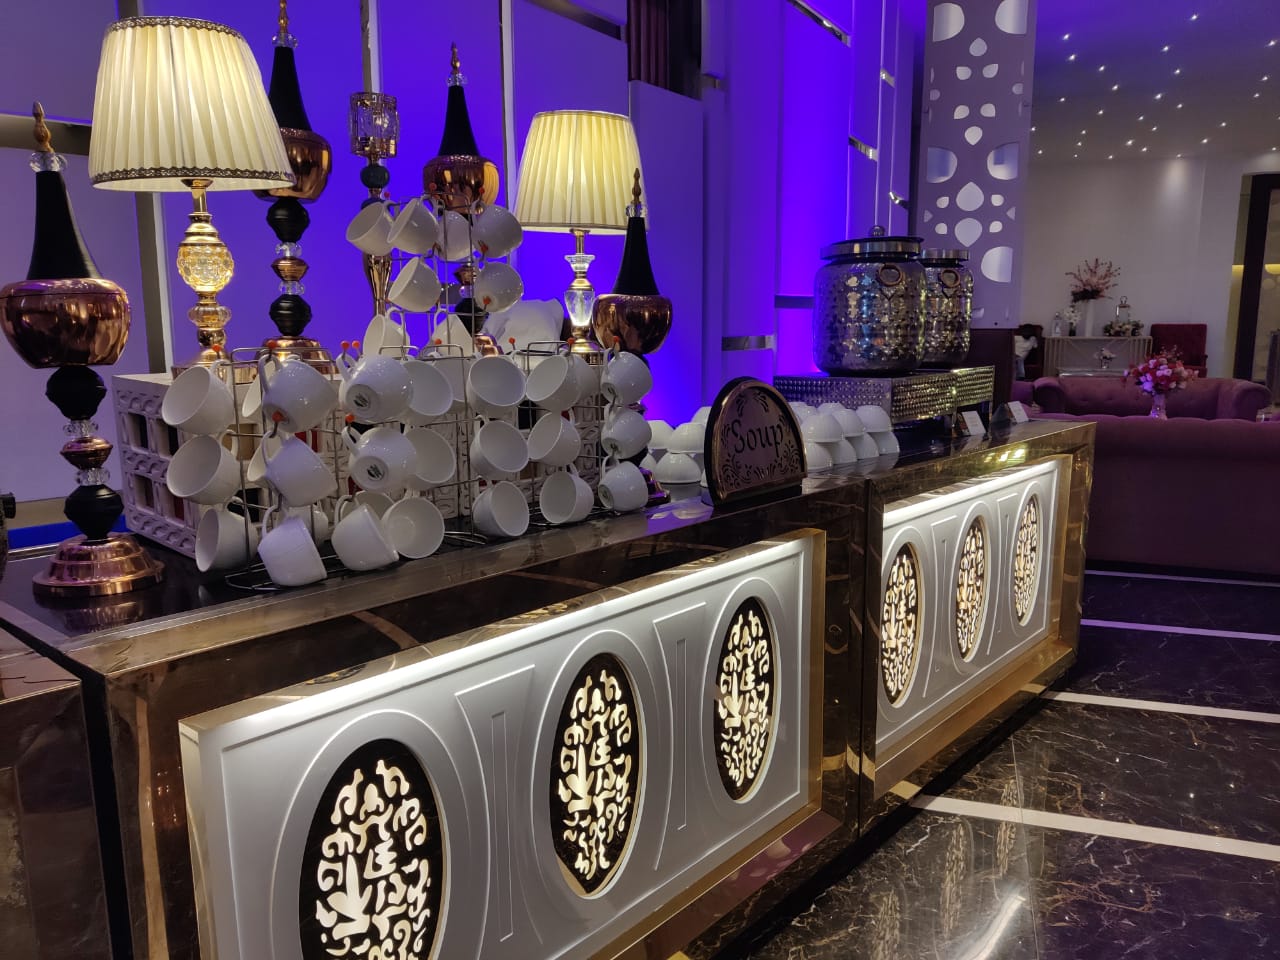 Top one rank catering services in chandigarh India  | Red Tag Caterers | Best catering in chandigarh India,top ranking catering in chandigarh India, premium catering services in chandigarh  - GL107864